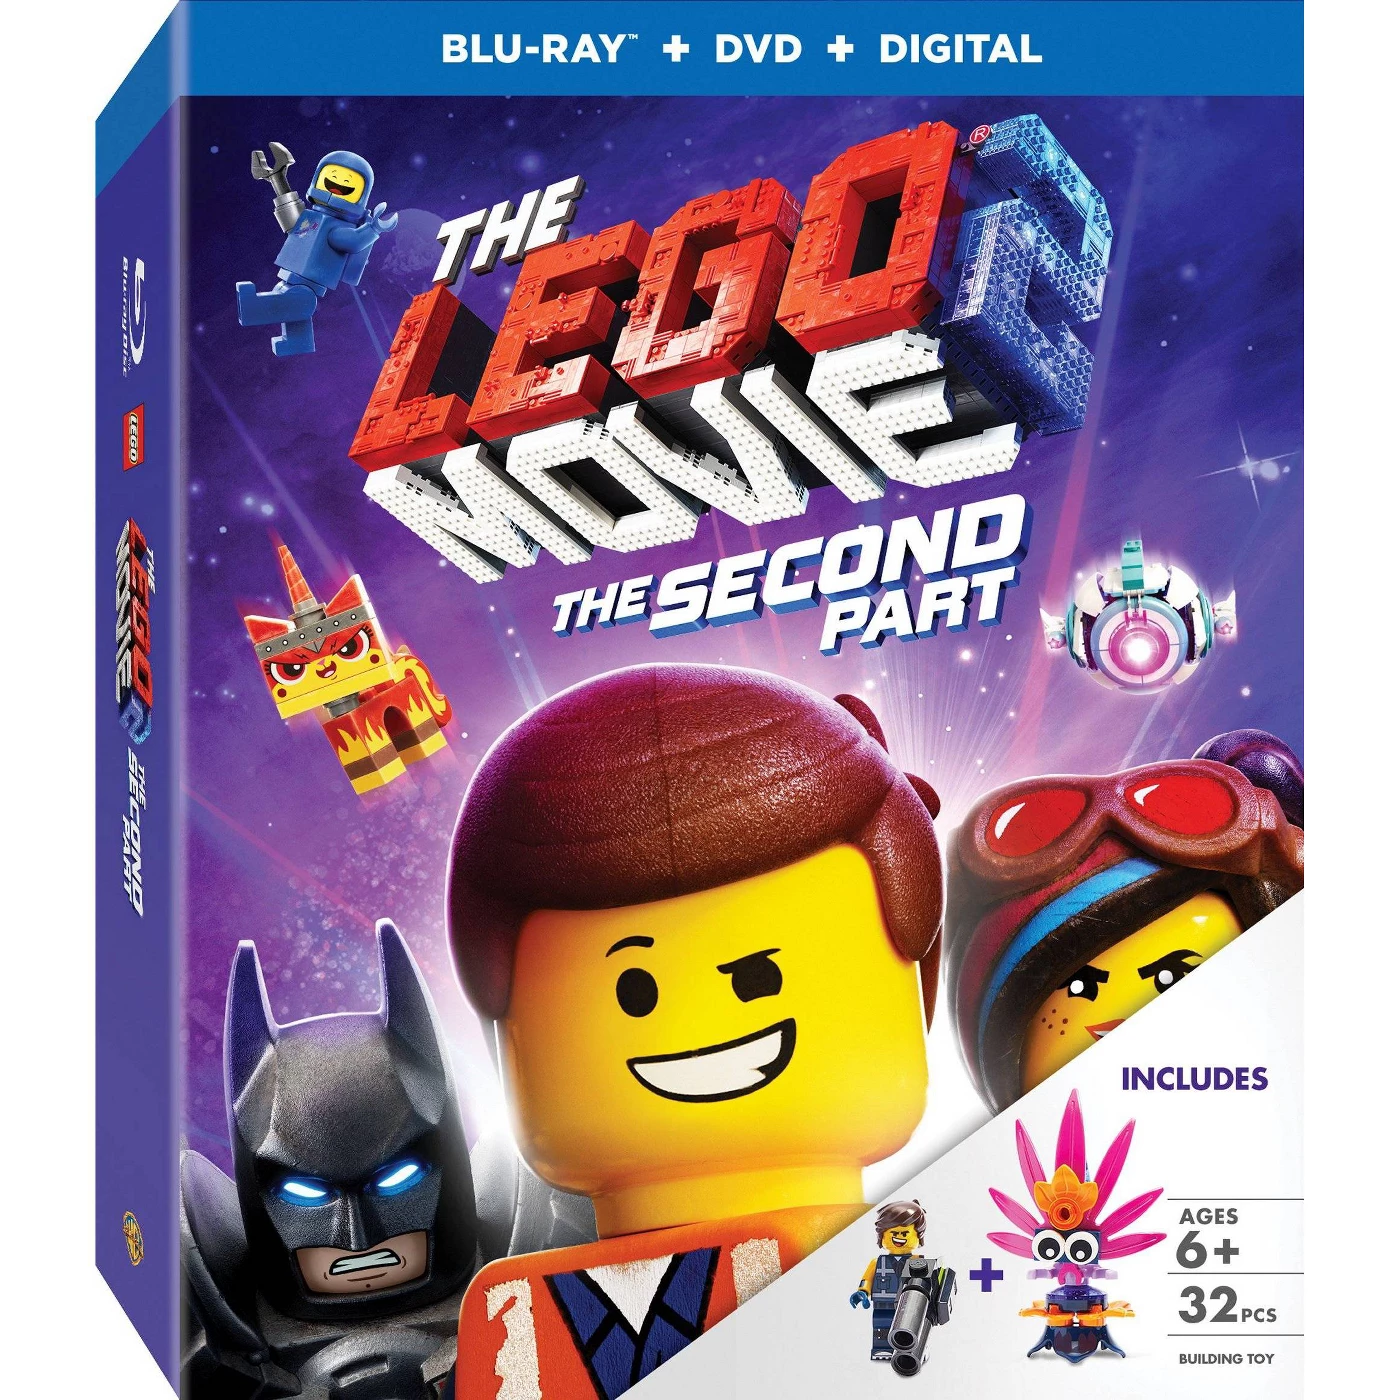 The Lego Movie 2: The Second Part (Target Exclusive) (Blu-Ray + DVD + Digital) - image 1 of 1